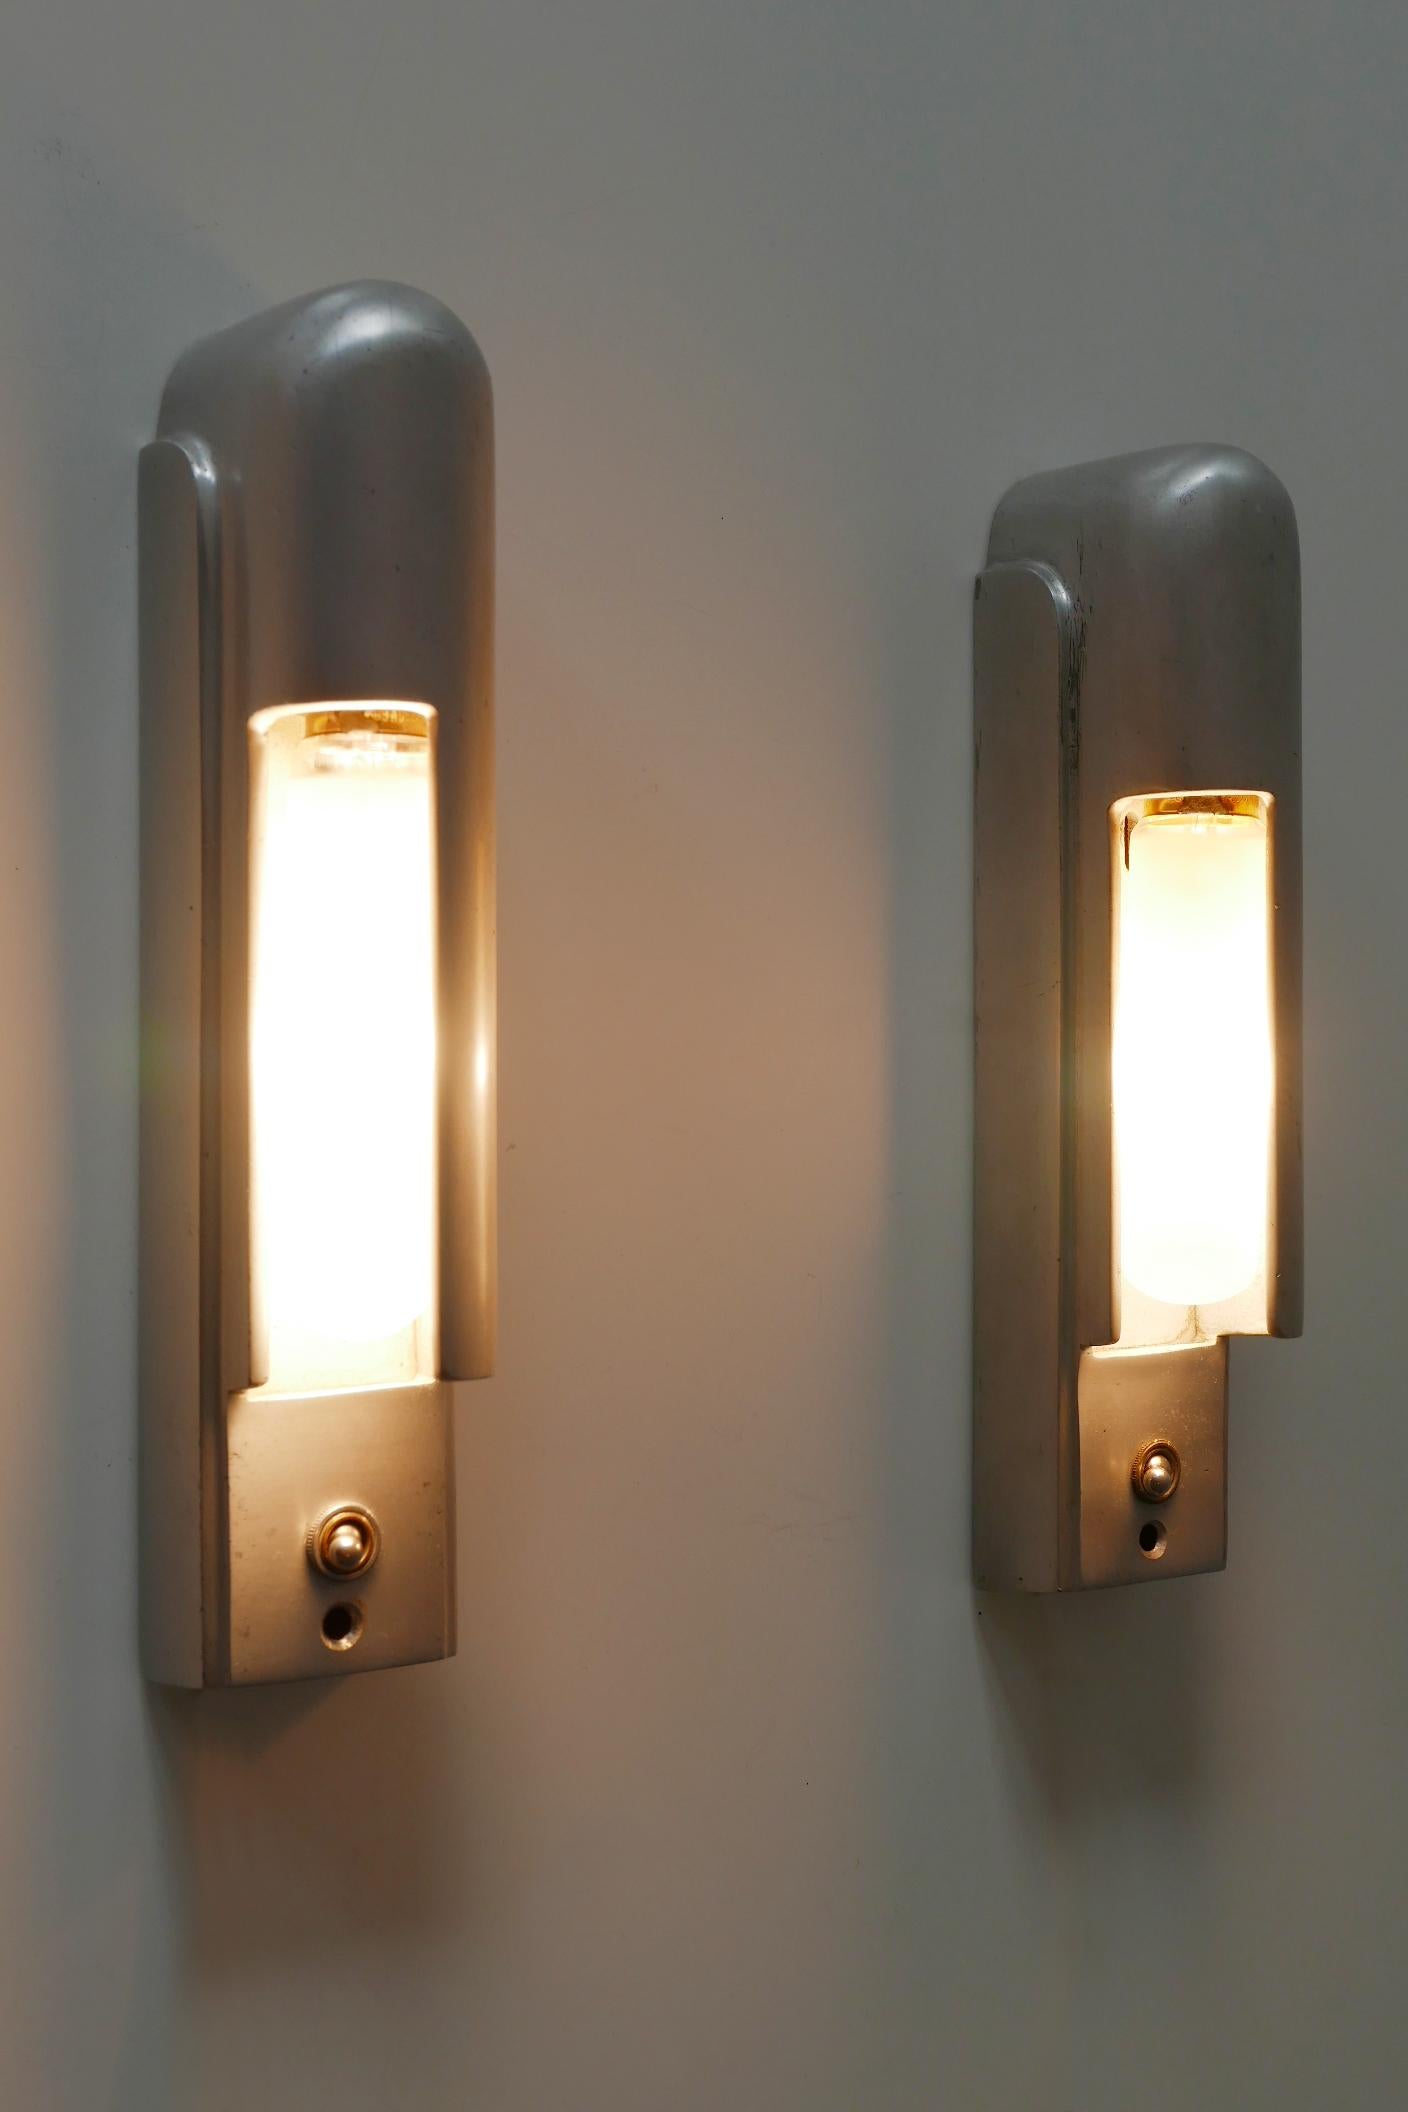 Mid-20th Century Rare Set of Two Streamline Cruise Ship Cabin Sconces by The Simes Co NY, 1930s For Sale